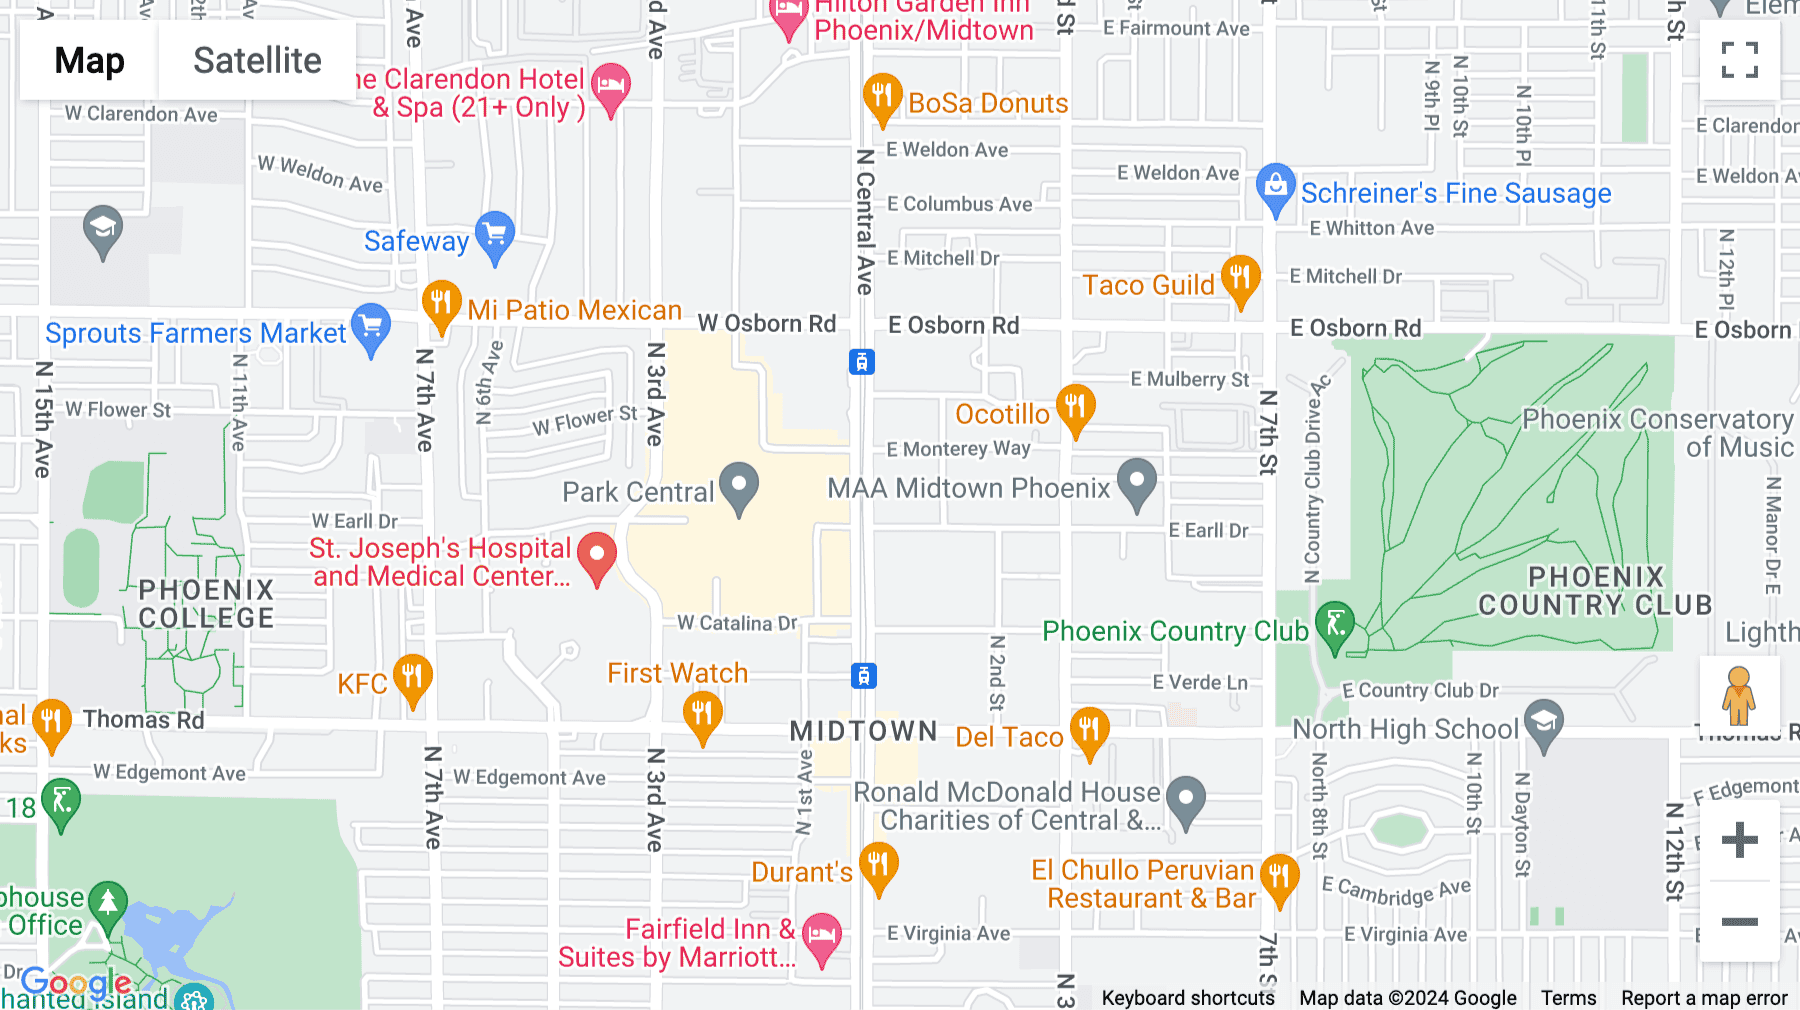 Click for interative map of 3101 N Central Avenue, Phoenix